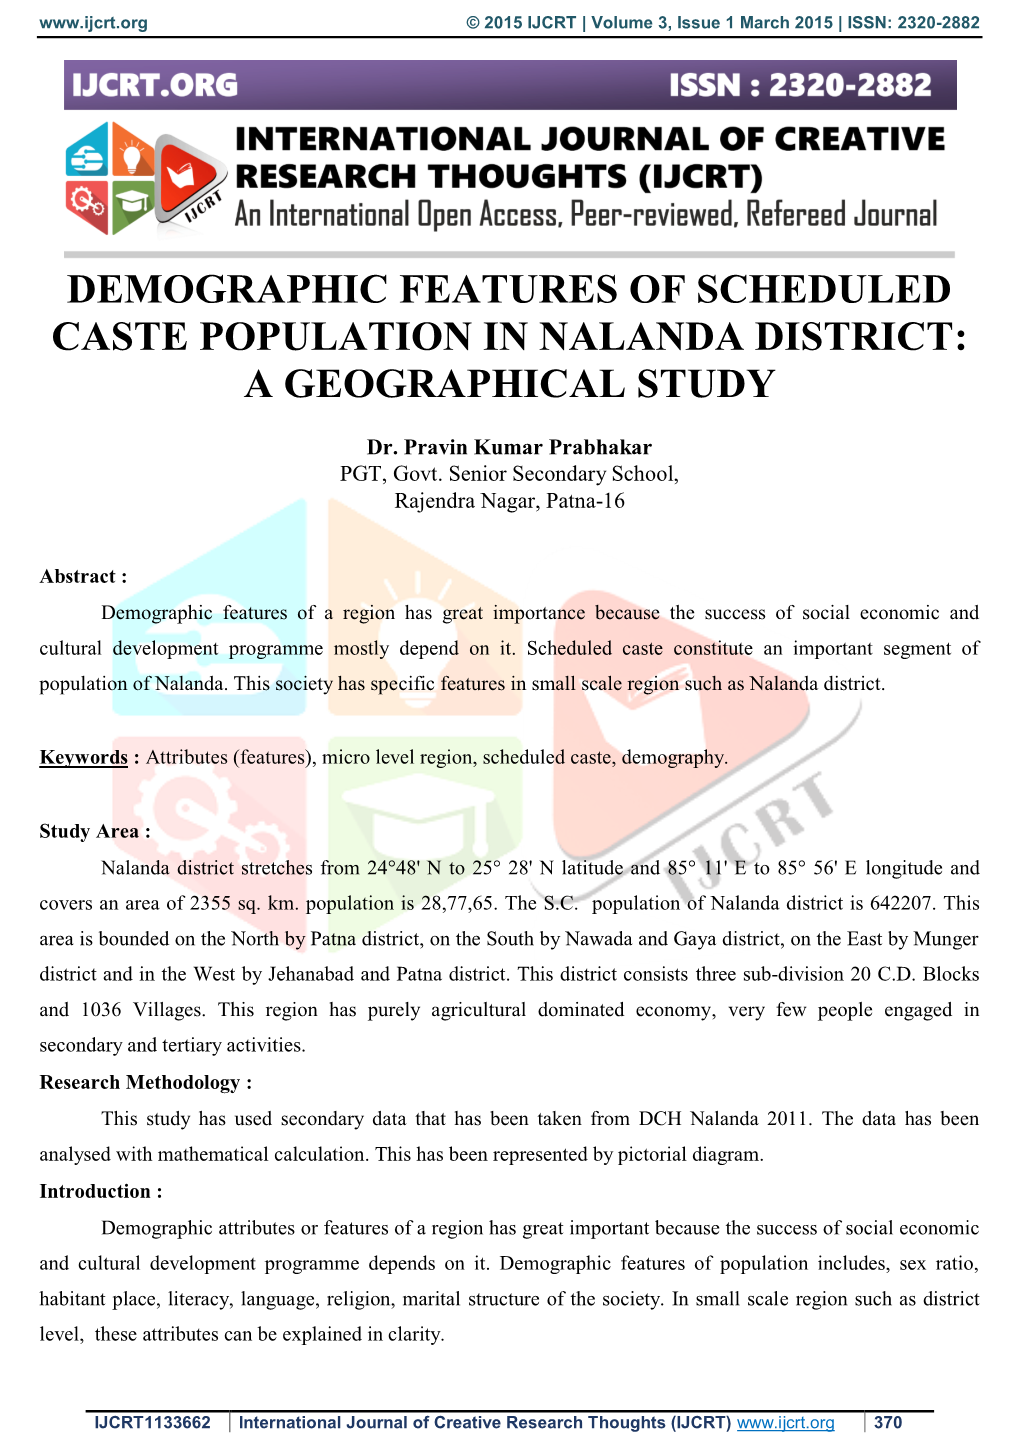 Demographic Features of Scheduled Caste Population in Nalanda District: a Geographical Study